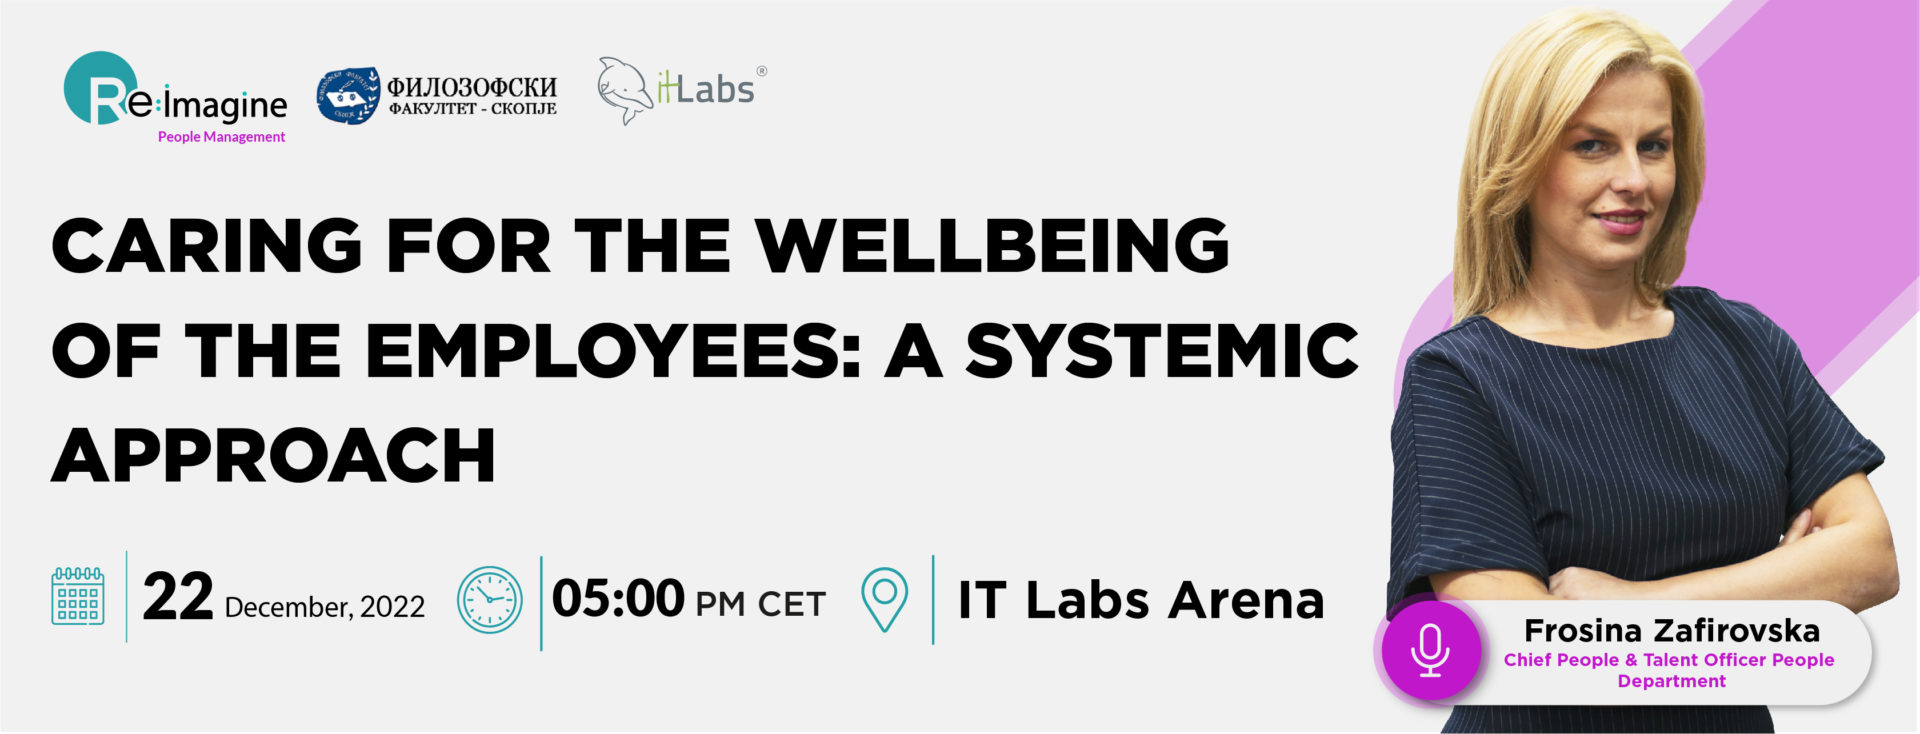 Caring for the Wellbeing of the Employees: A Systemic Approach